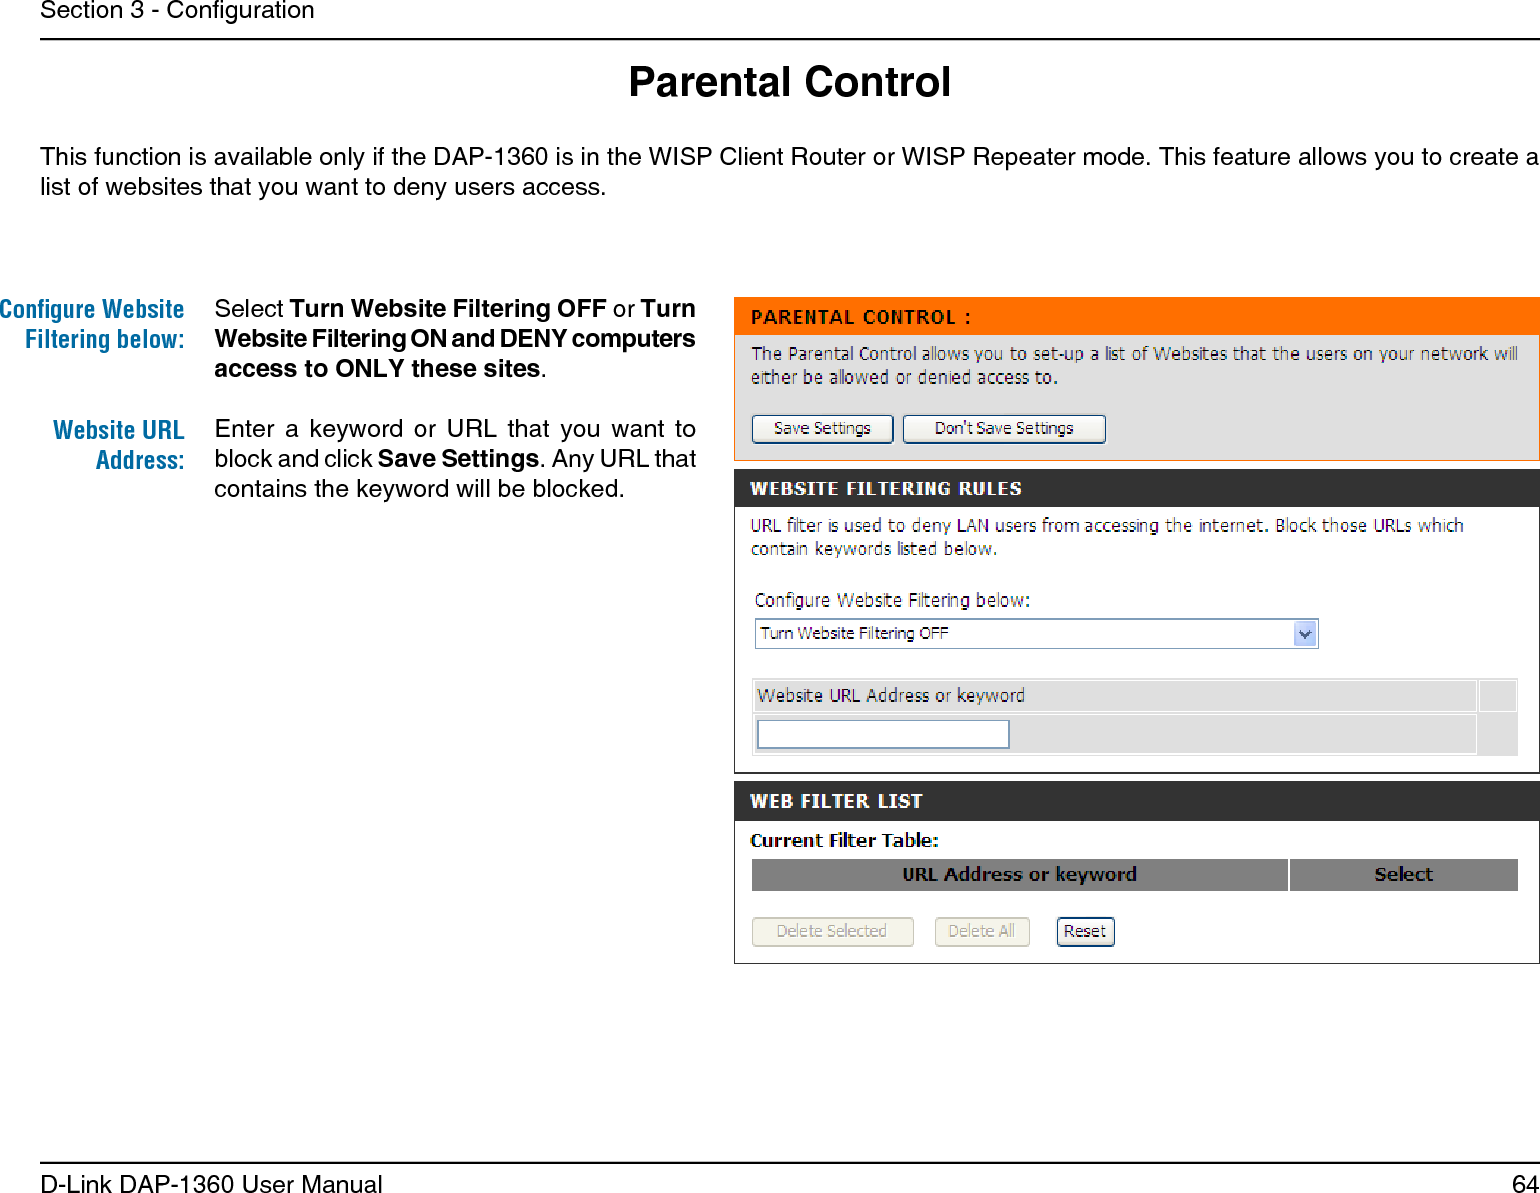 64D-Link DAP-1360 User ManualSection 3 - CongurationParental ControlThis function is available only if the DAP-1360 is in the WISP Client Router or WISP Repeater mode. This feature allows you to create a list of websites that you want to deny users access. Enter  a  keyword  or  URL  that  you  want  to block and click Save Settings. Any URL that contains the keyword will be blocked.Website URL Address:Select Turn Website Filtering OFF or Turn Website Filtering ON and DENY computers access to ONLY these sites.Conﬁgure Website Filtering below: